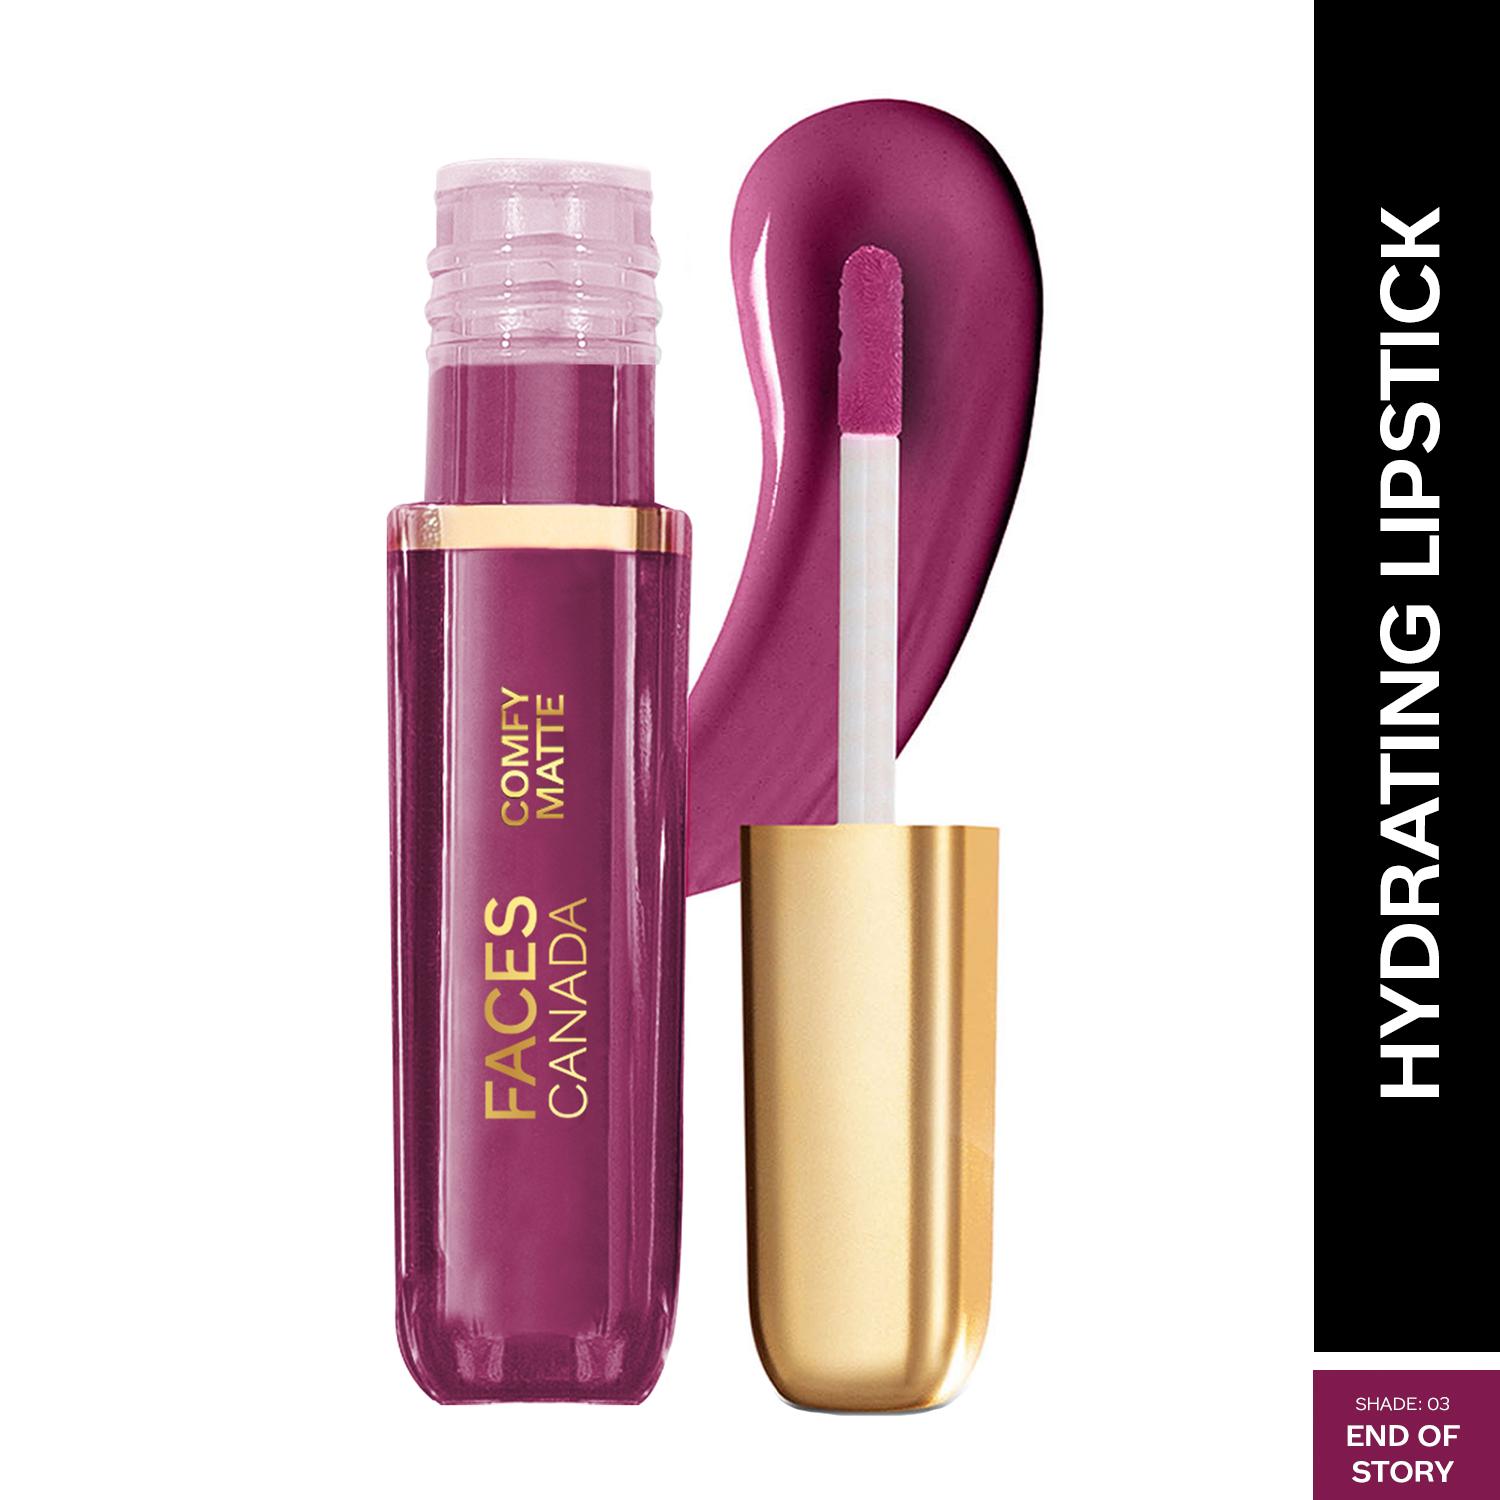 Faces Canada | Faces Canada Comfy Matte Liquid Lipstick, 10HR Stay, No Dryness - End Of Story 03 (3 ml)